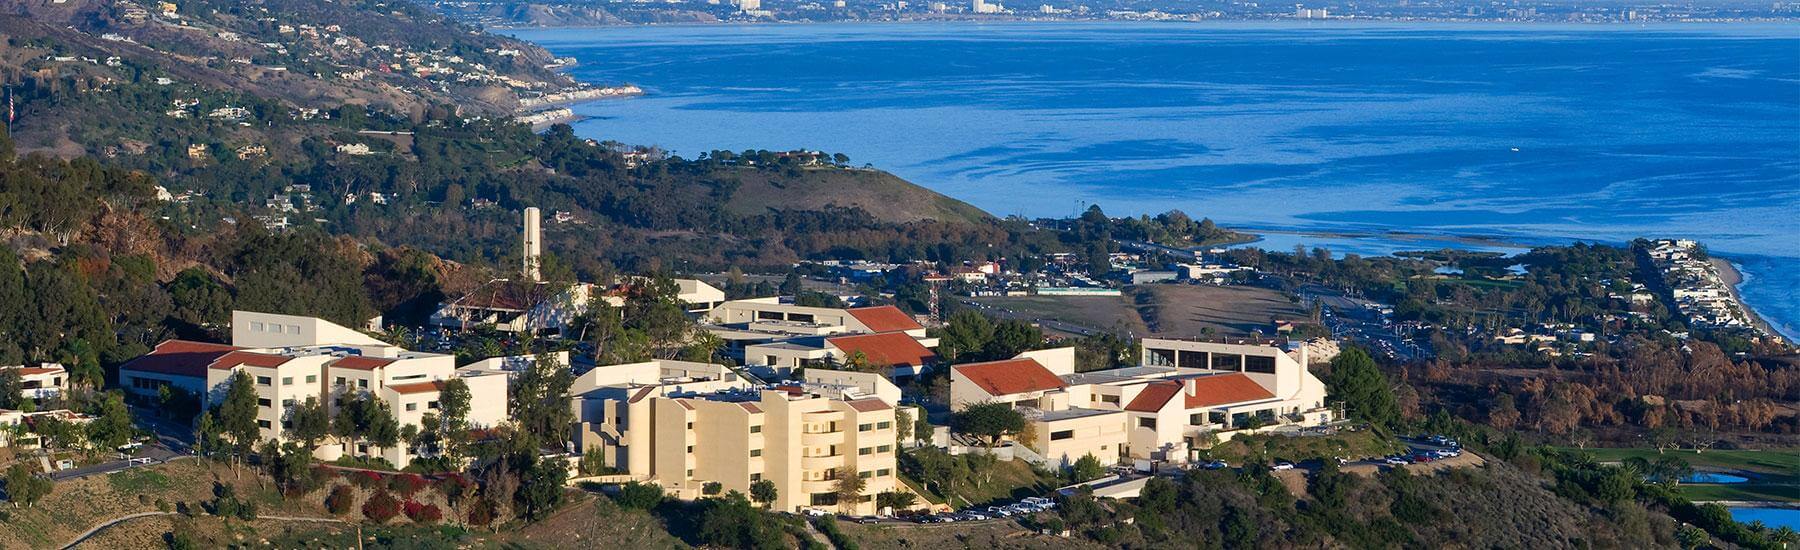 10 of the Coolest Clubs at Pepperdine University OneClass Blog